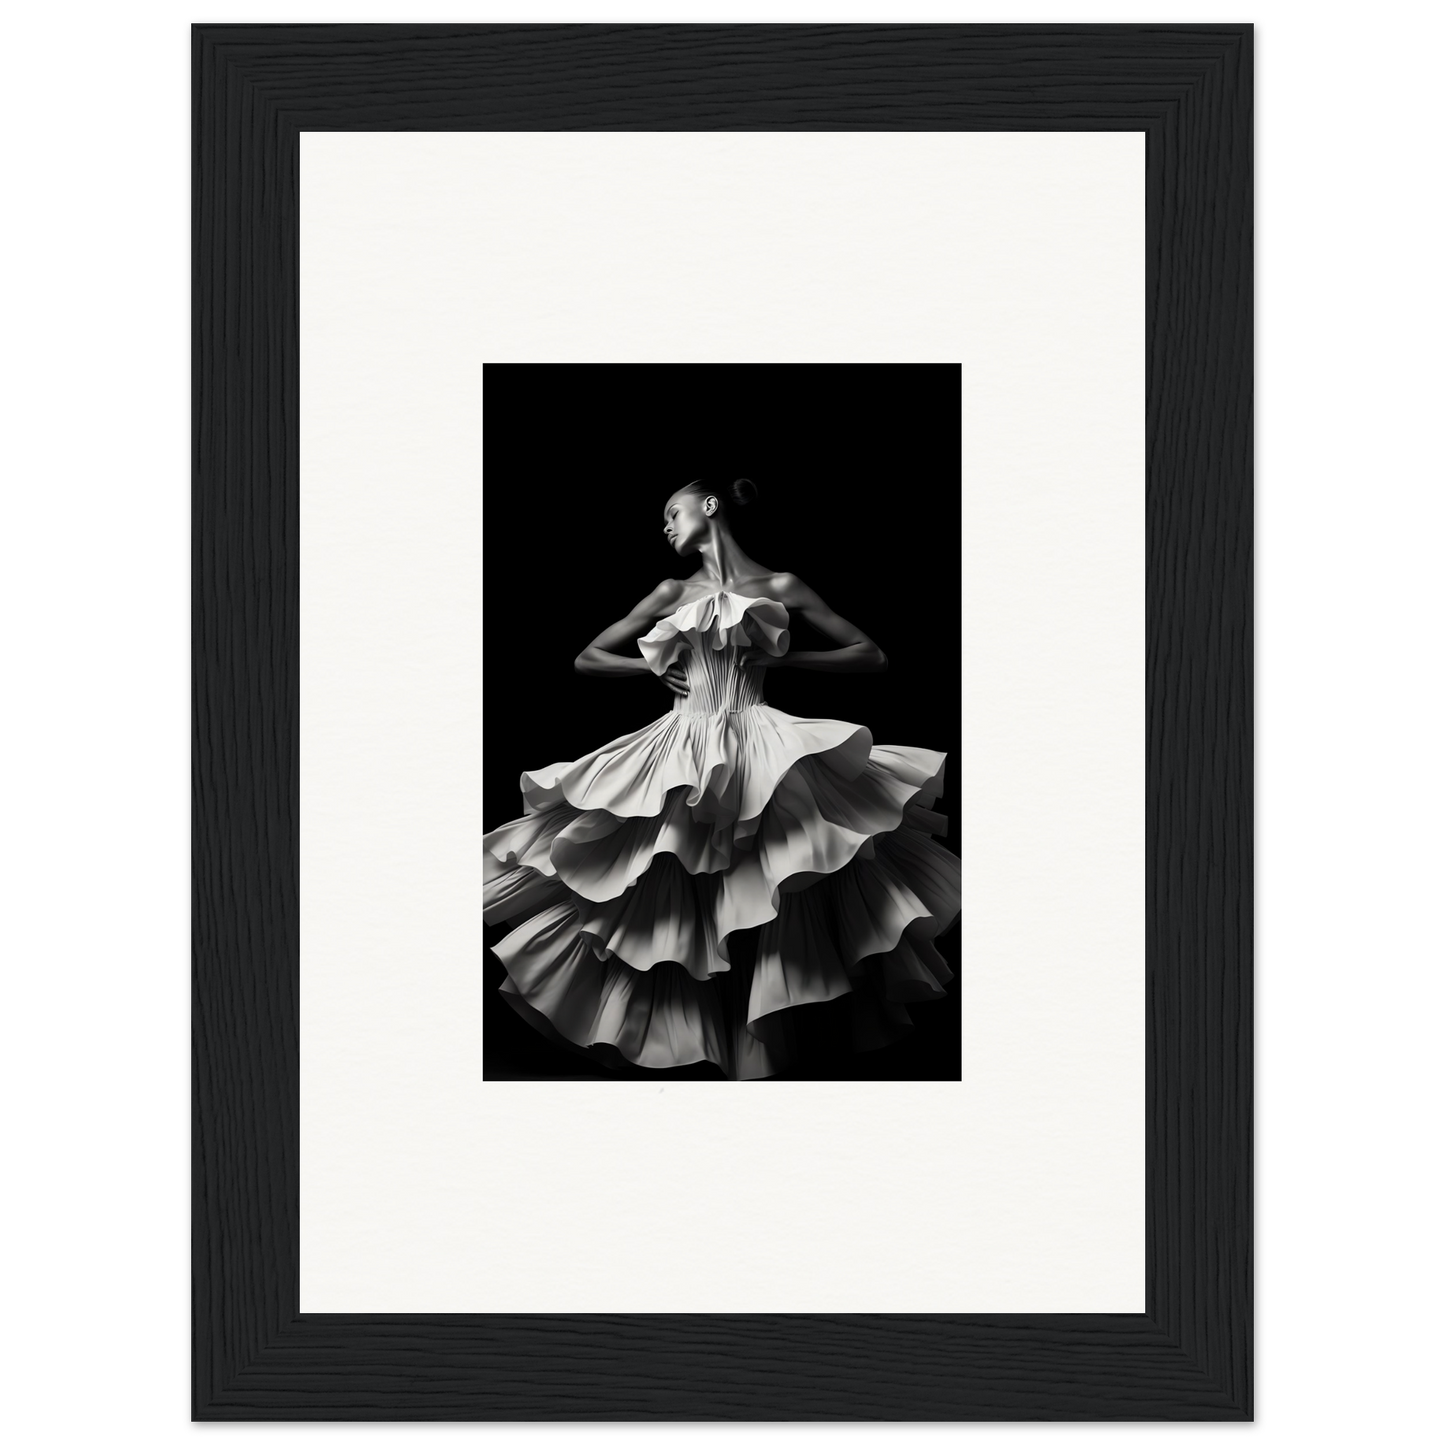 Dancers and time a2 - framed poster - 13x18 cm / 5x7″ /